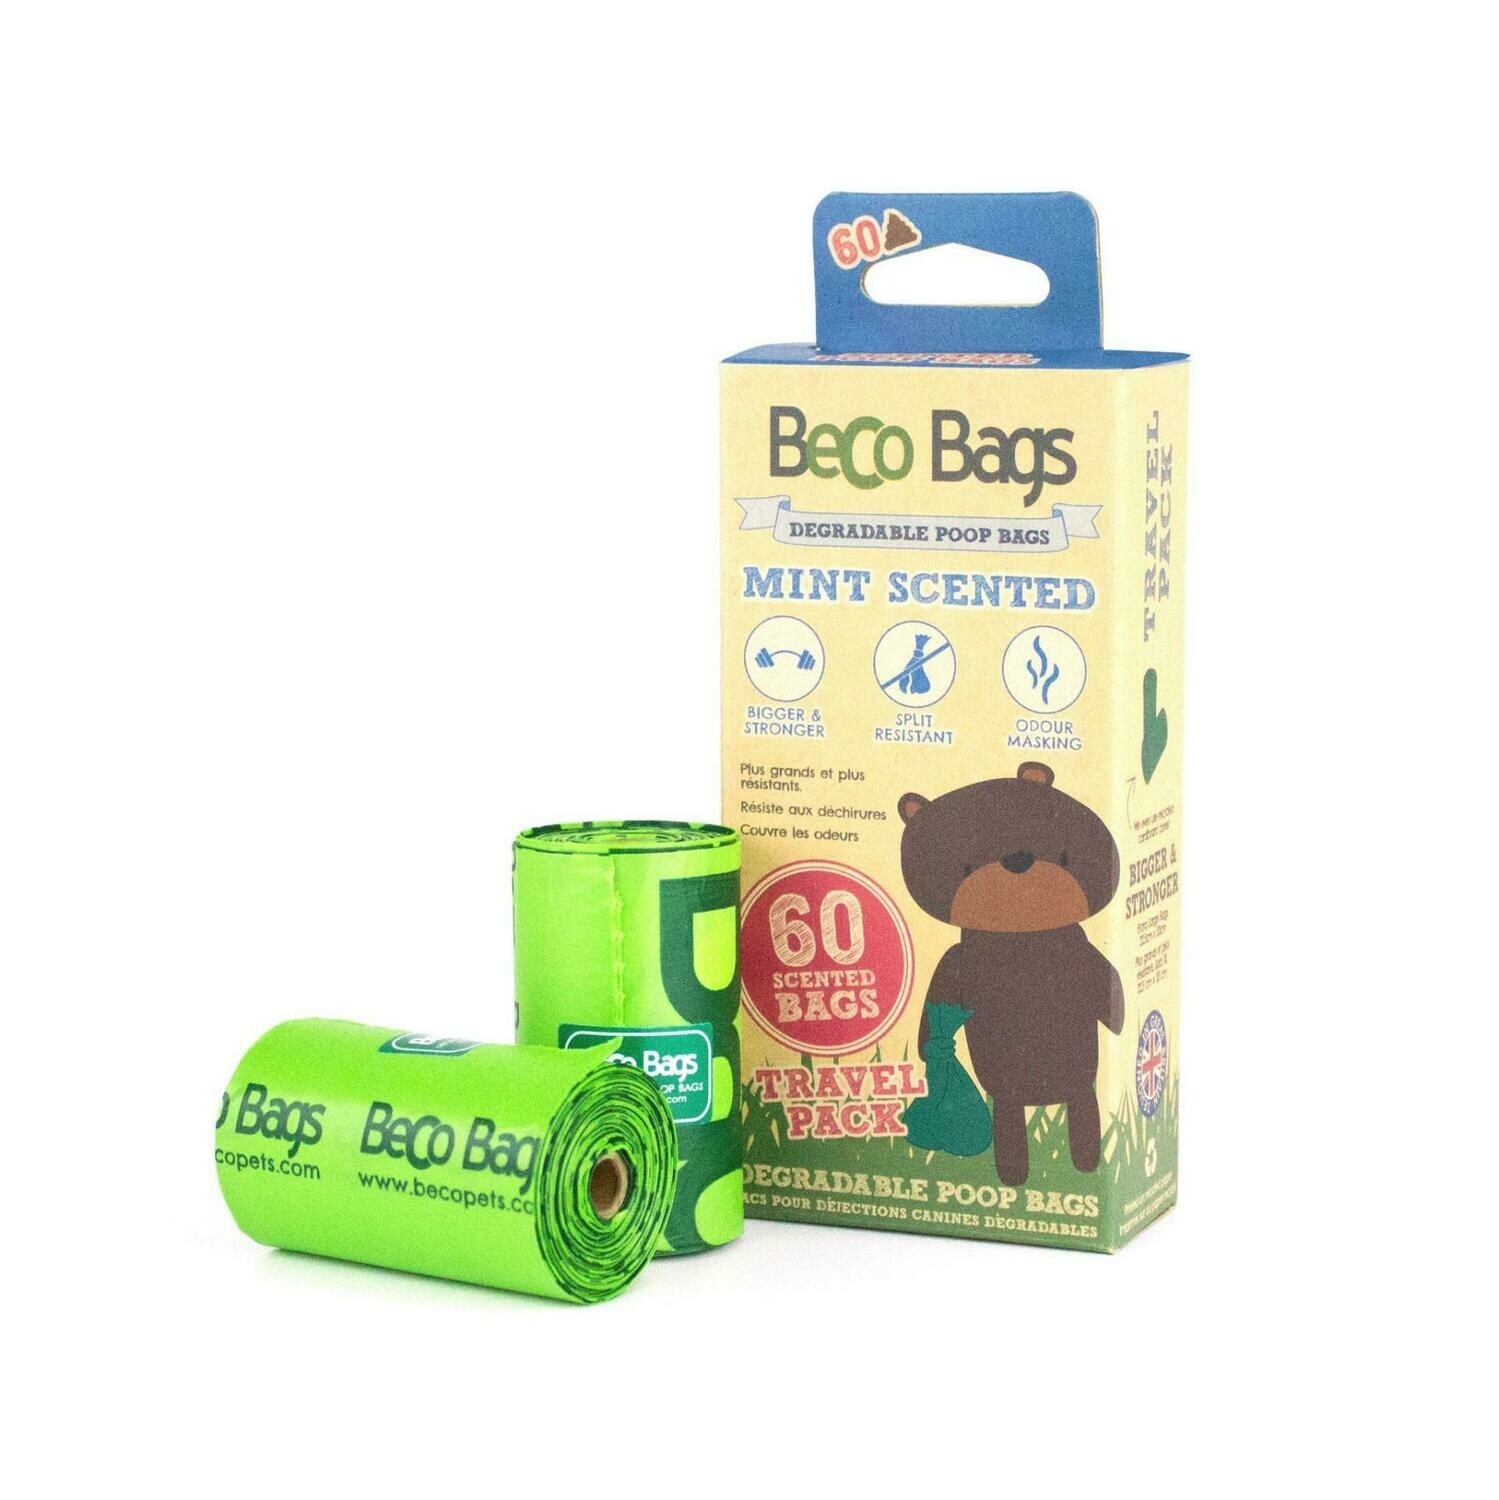 Beco Degradable Poop Bags, 60 Mint Scented Bags